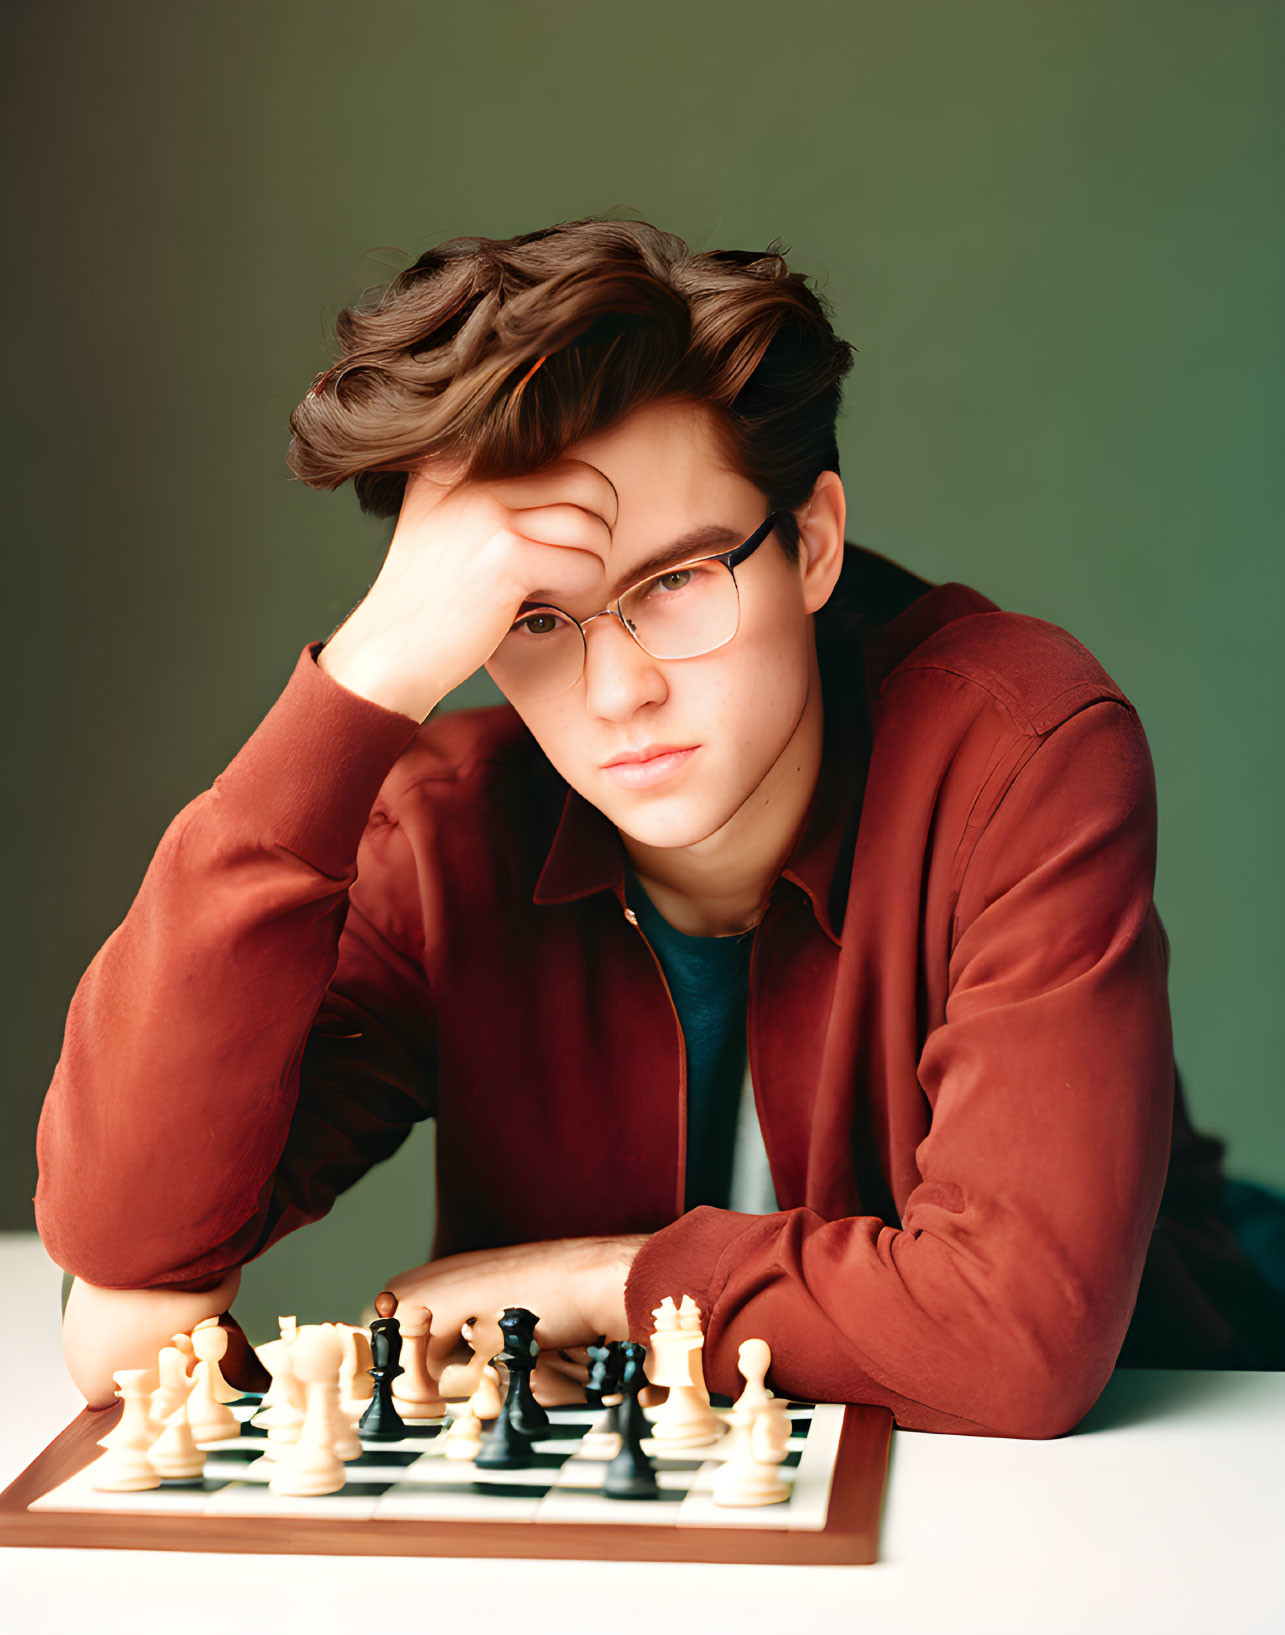 Man in glasses contemplating chess game on gradient background.